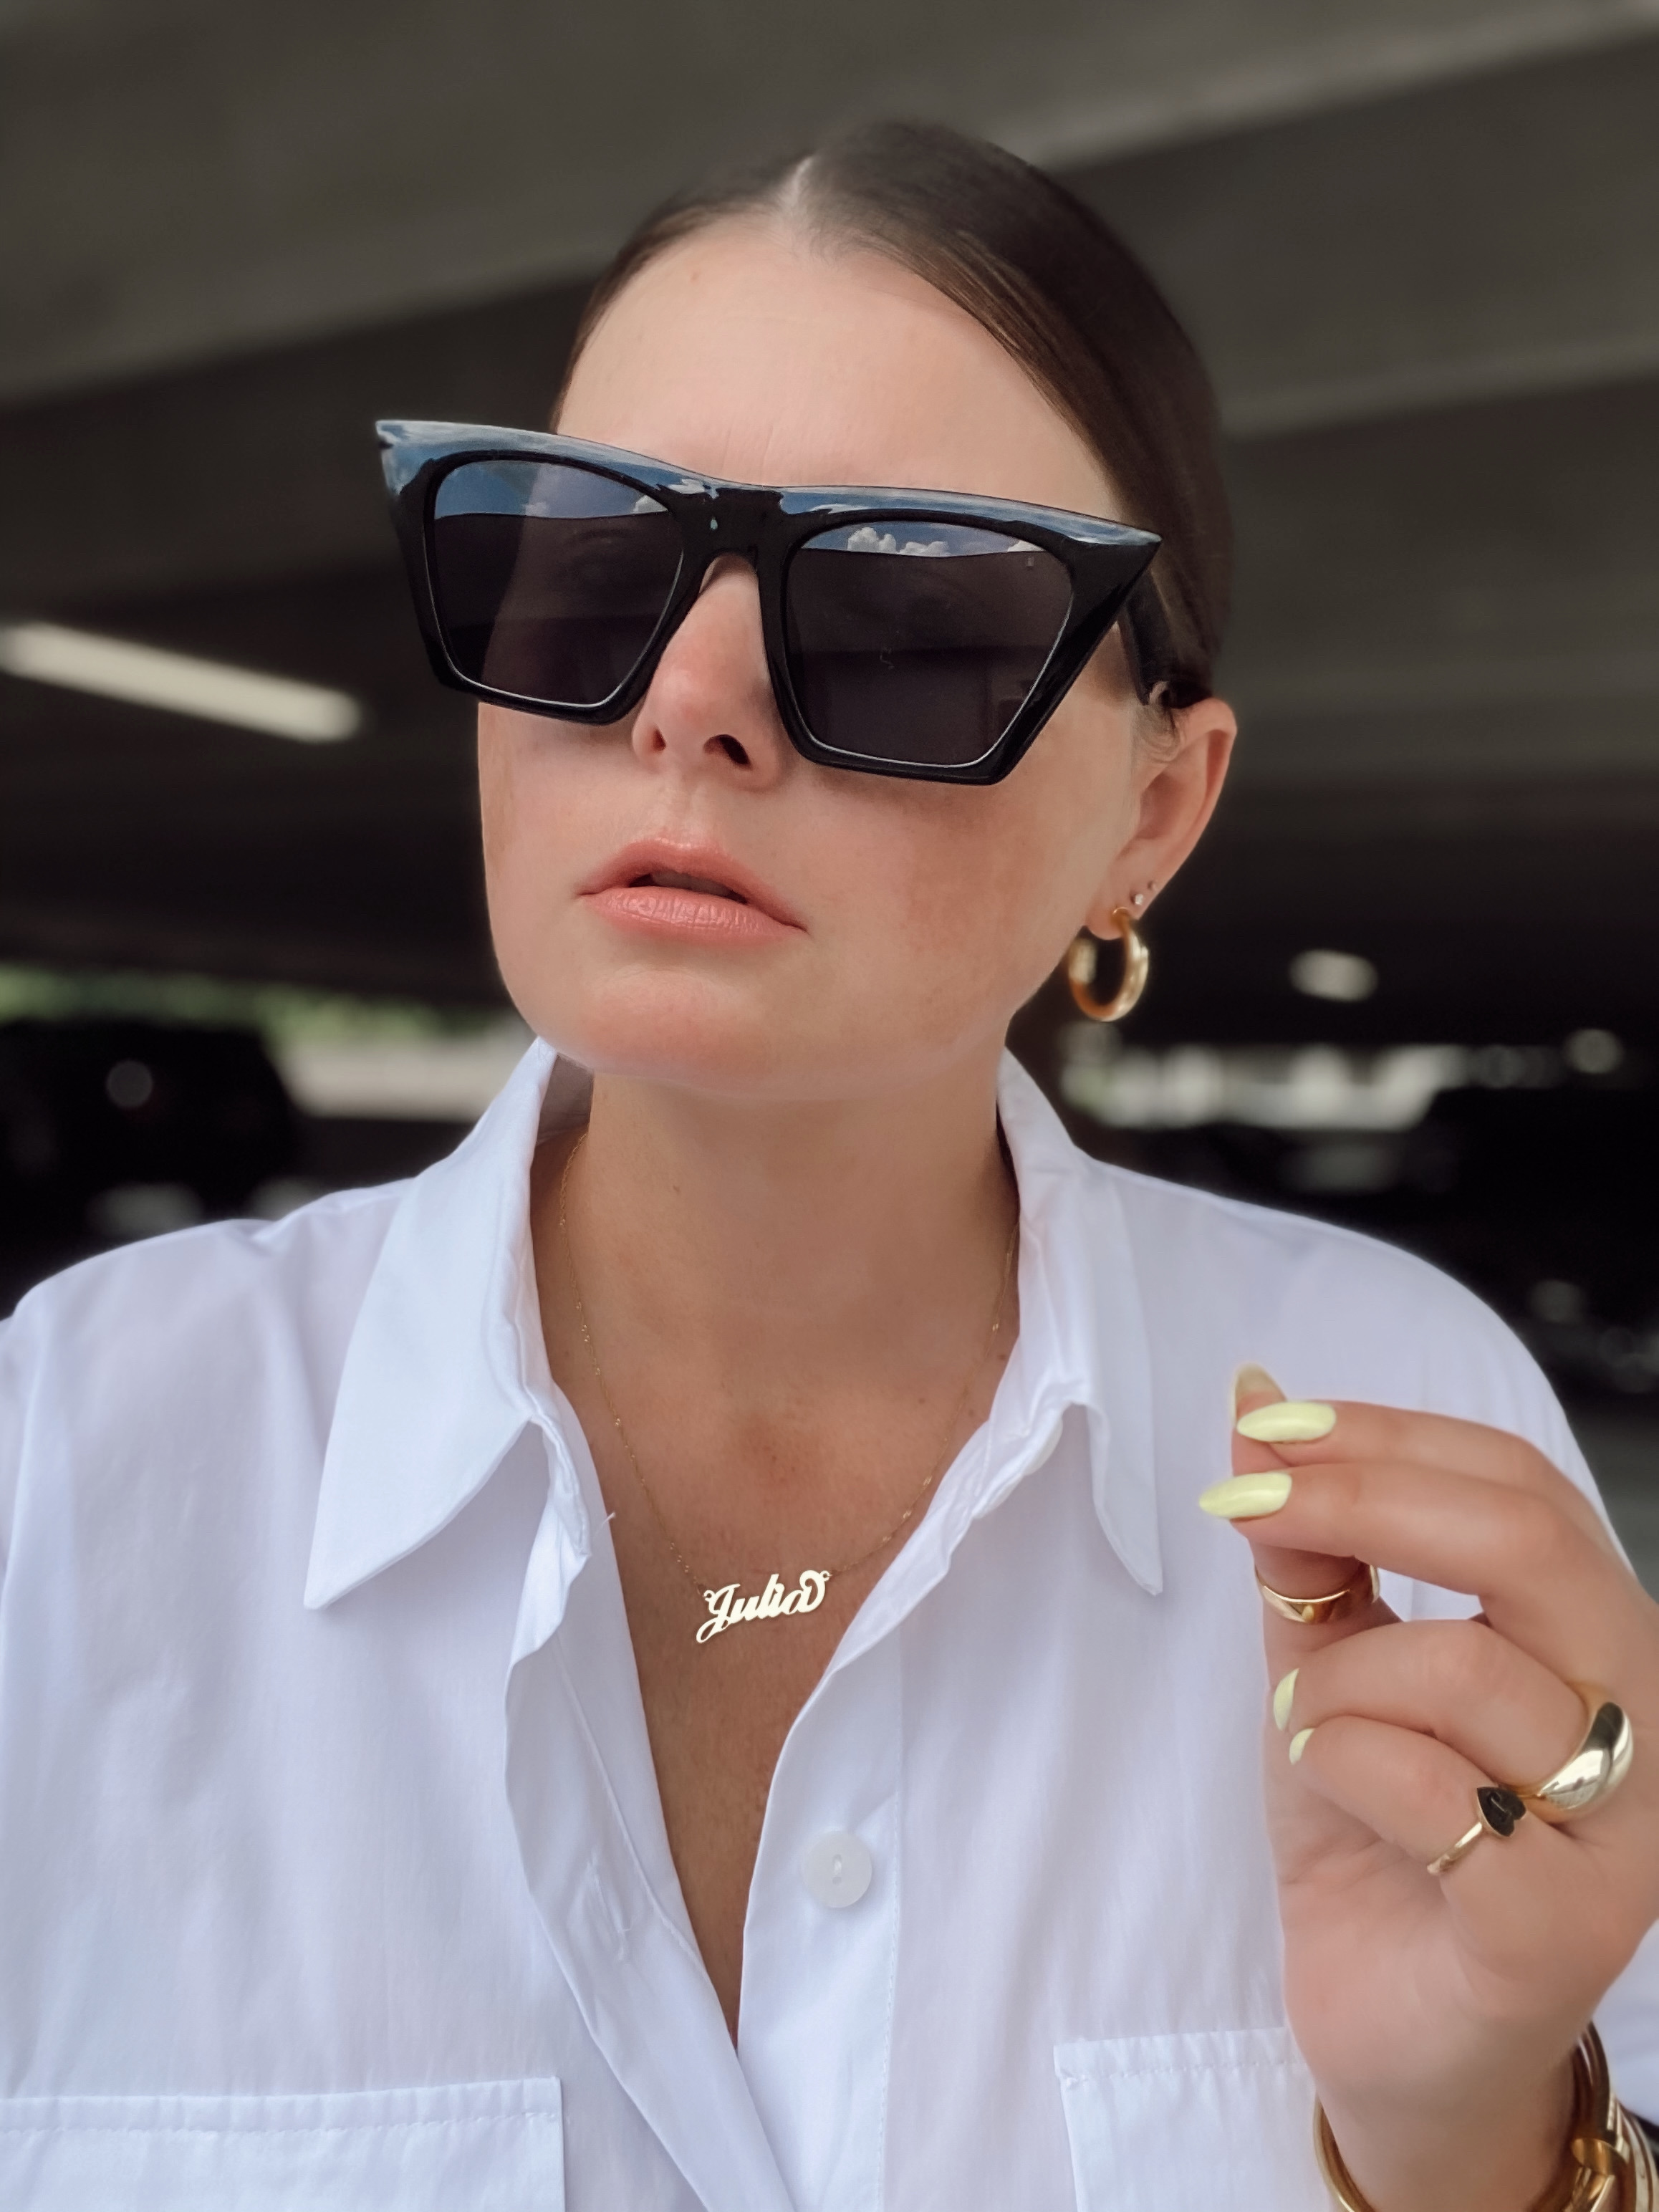 BEST ACCESSORIES TO ELEVATE YOUR LOOK 2020: http://www.juliamarieb.com/2020/08/16/best-accessories-to-elevate-your-look-2020/ | @julia.marie.b